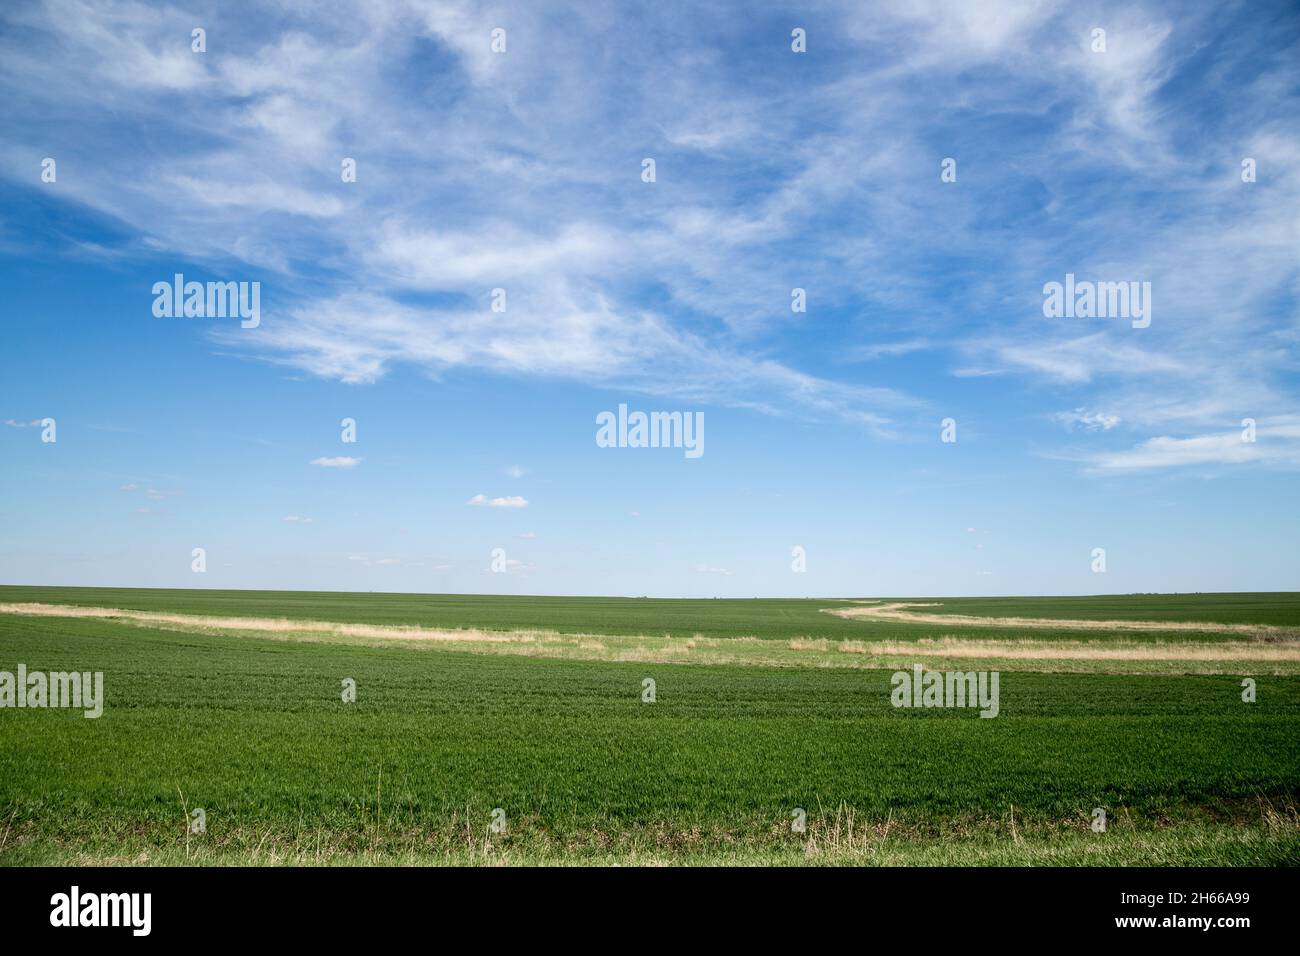 Wide open field with blue sky Stock Photo